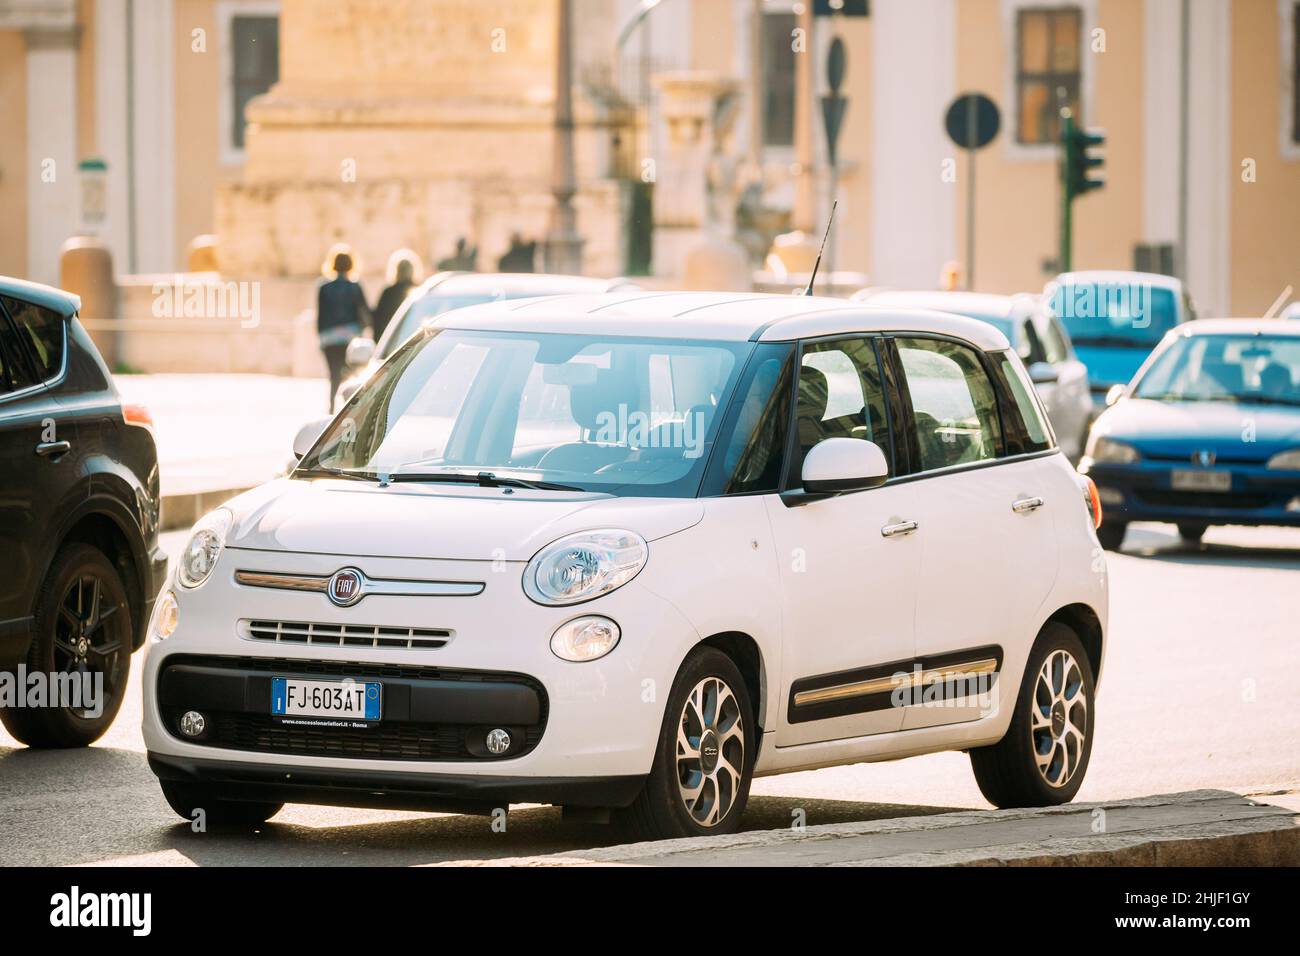 Rome, Italy. White Color Fiat 500L Moving At Rome Street. Five-door, five passenger, front-engine, front-wheel drive, high-roof B-segment MPV (compact Stock Photo